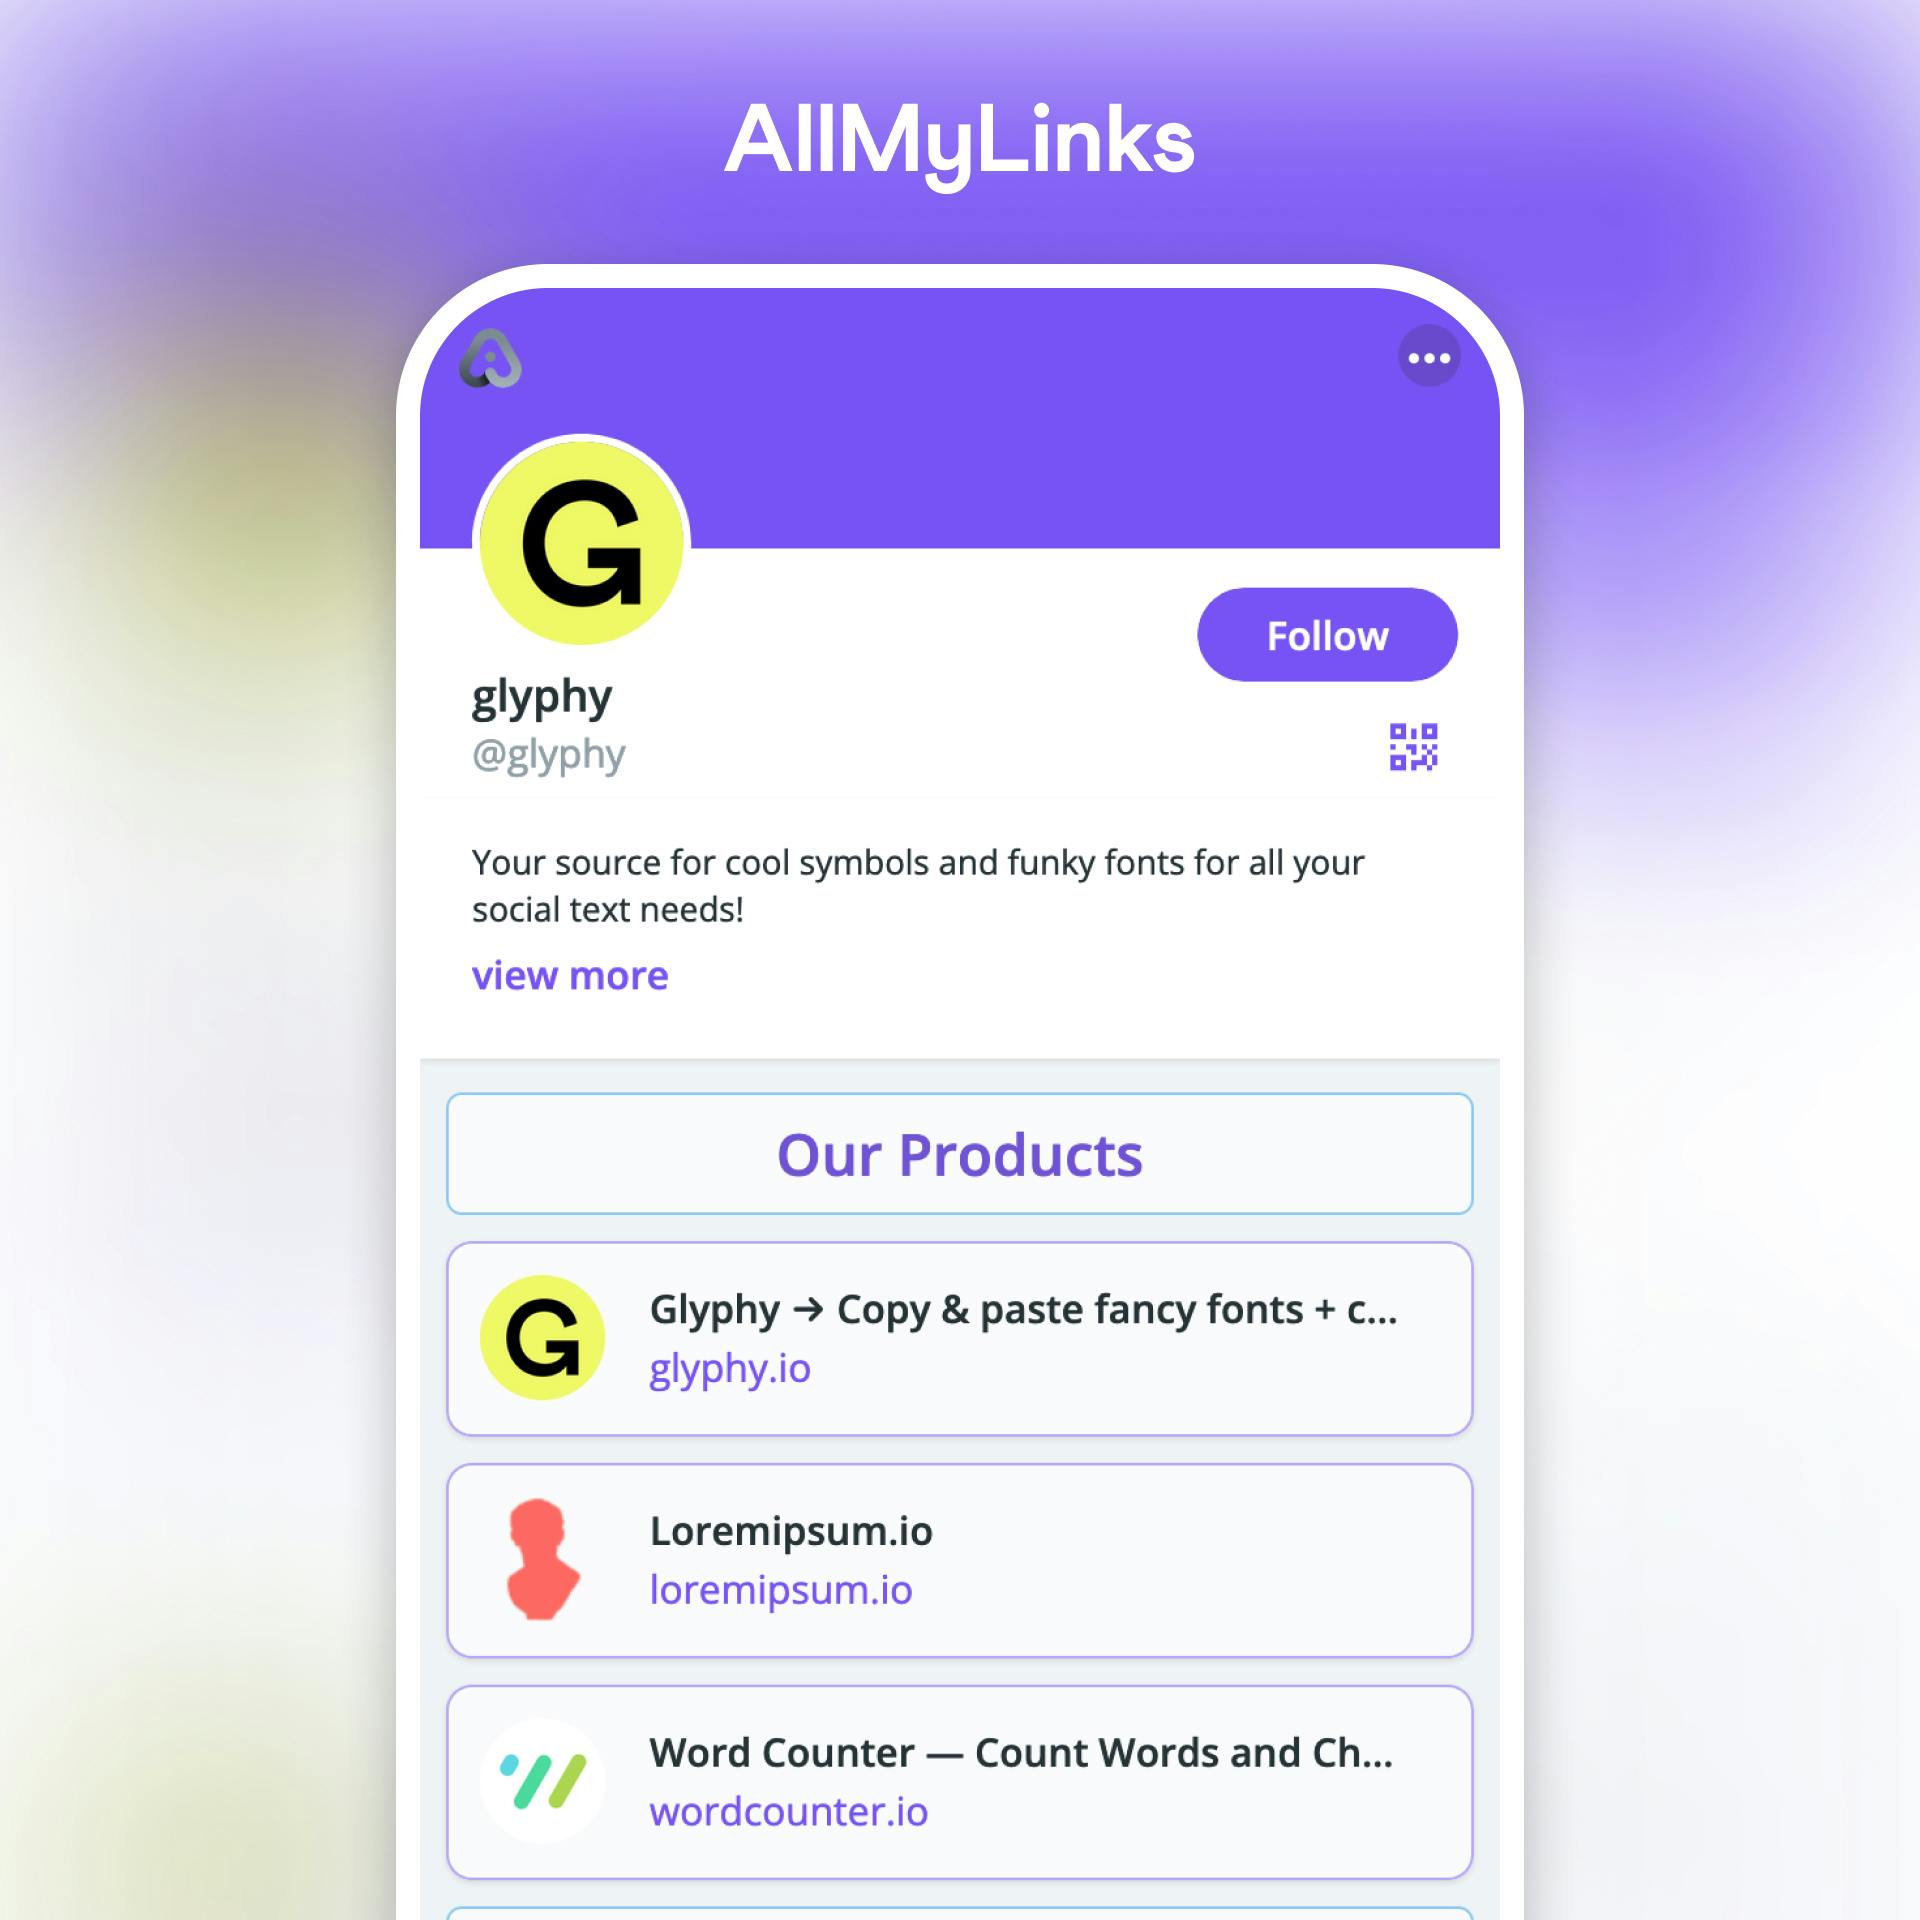 AllMyLinks example profile on a mobile device